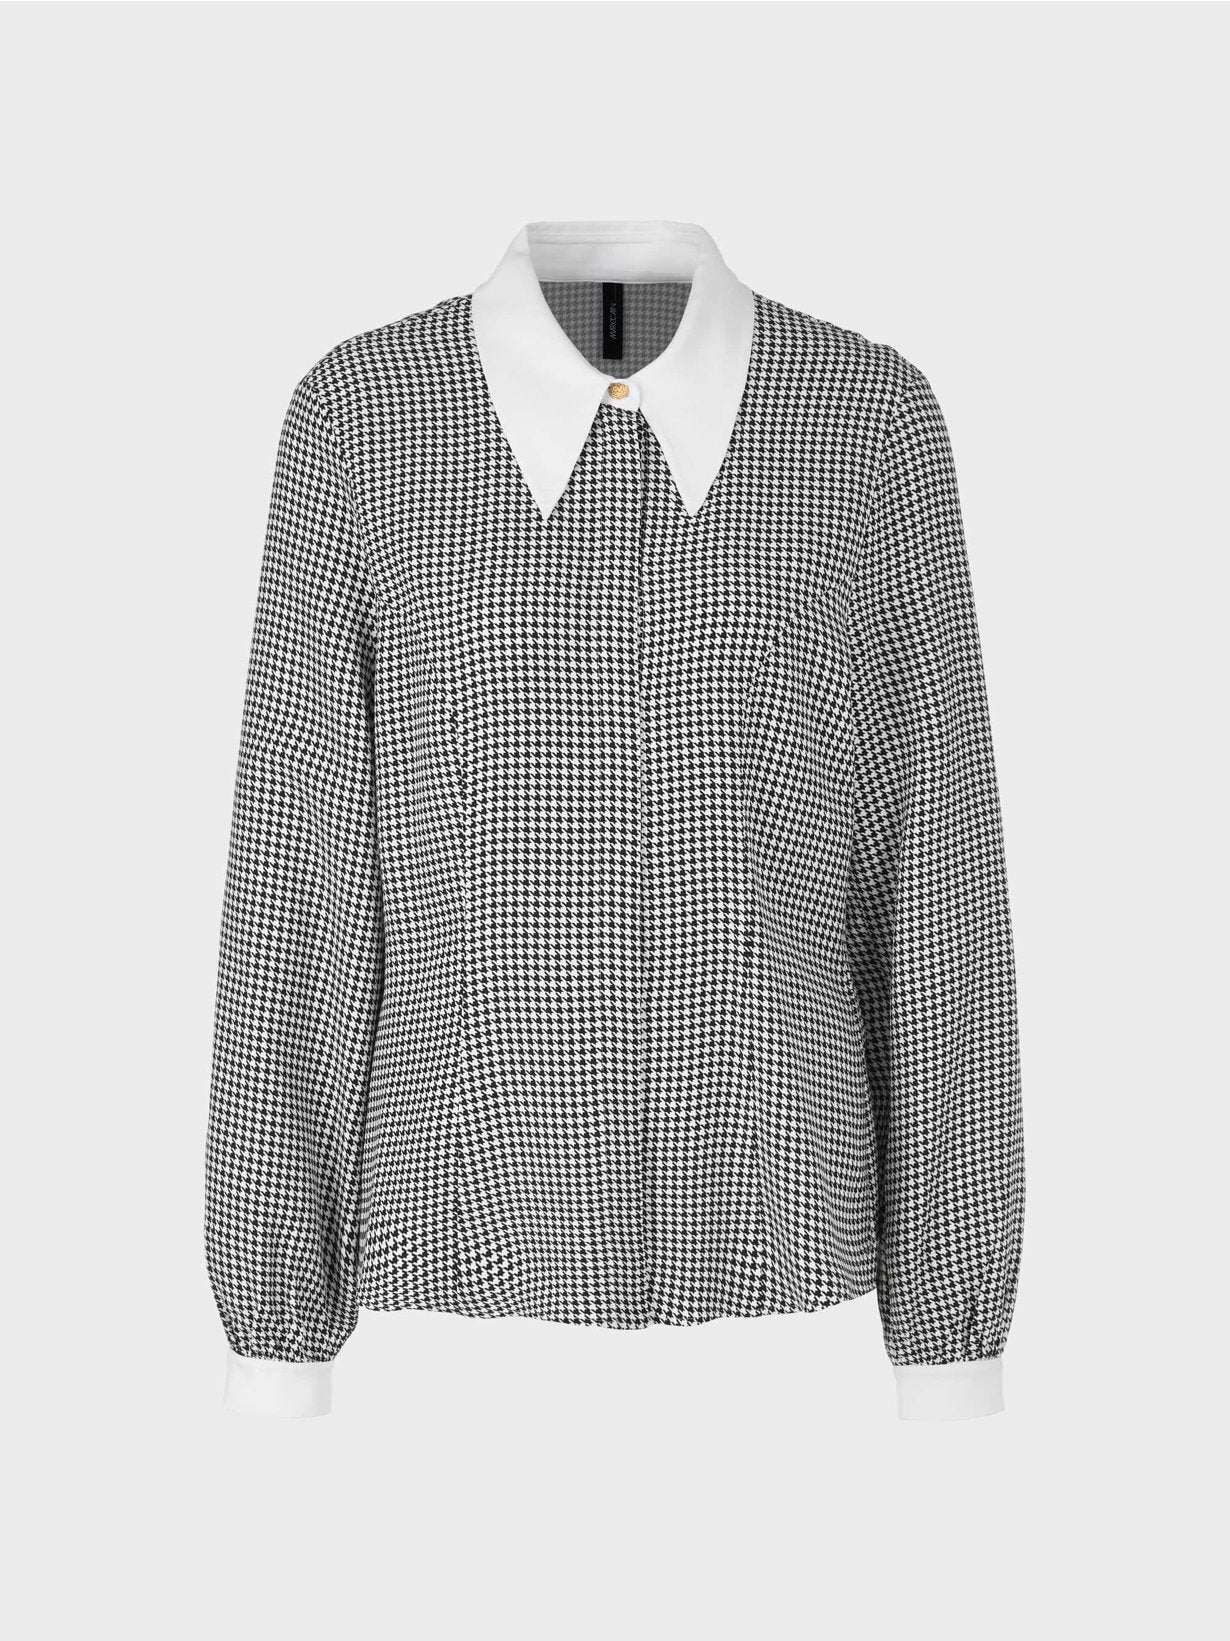 Viscose Blouse With Houndstooth Check_VC 51.34 W28_190_06